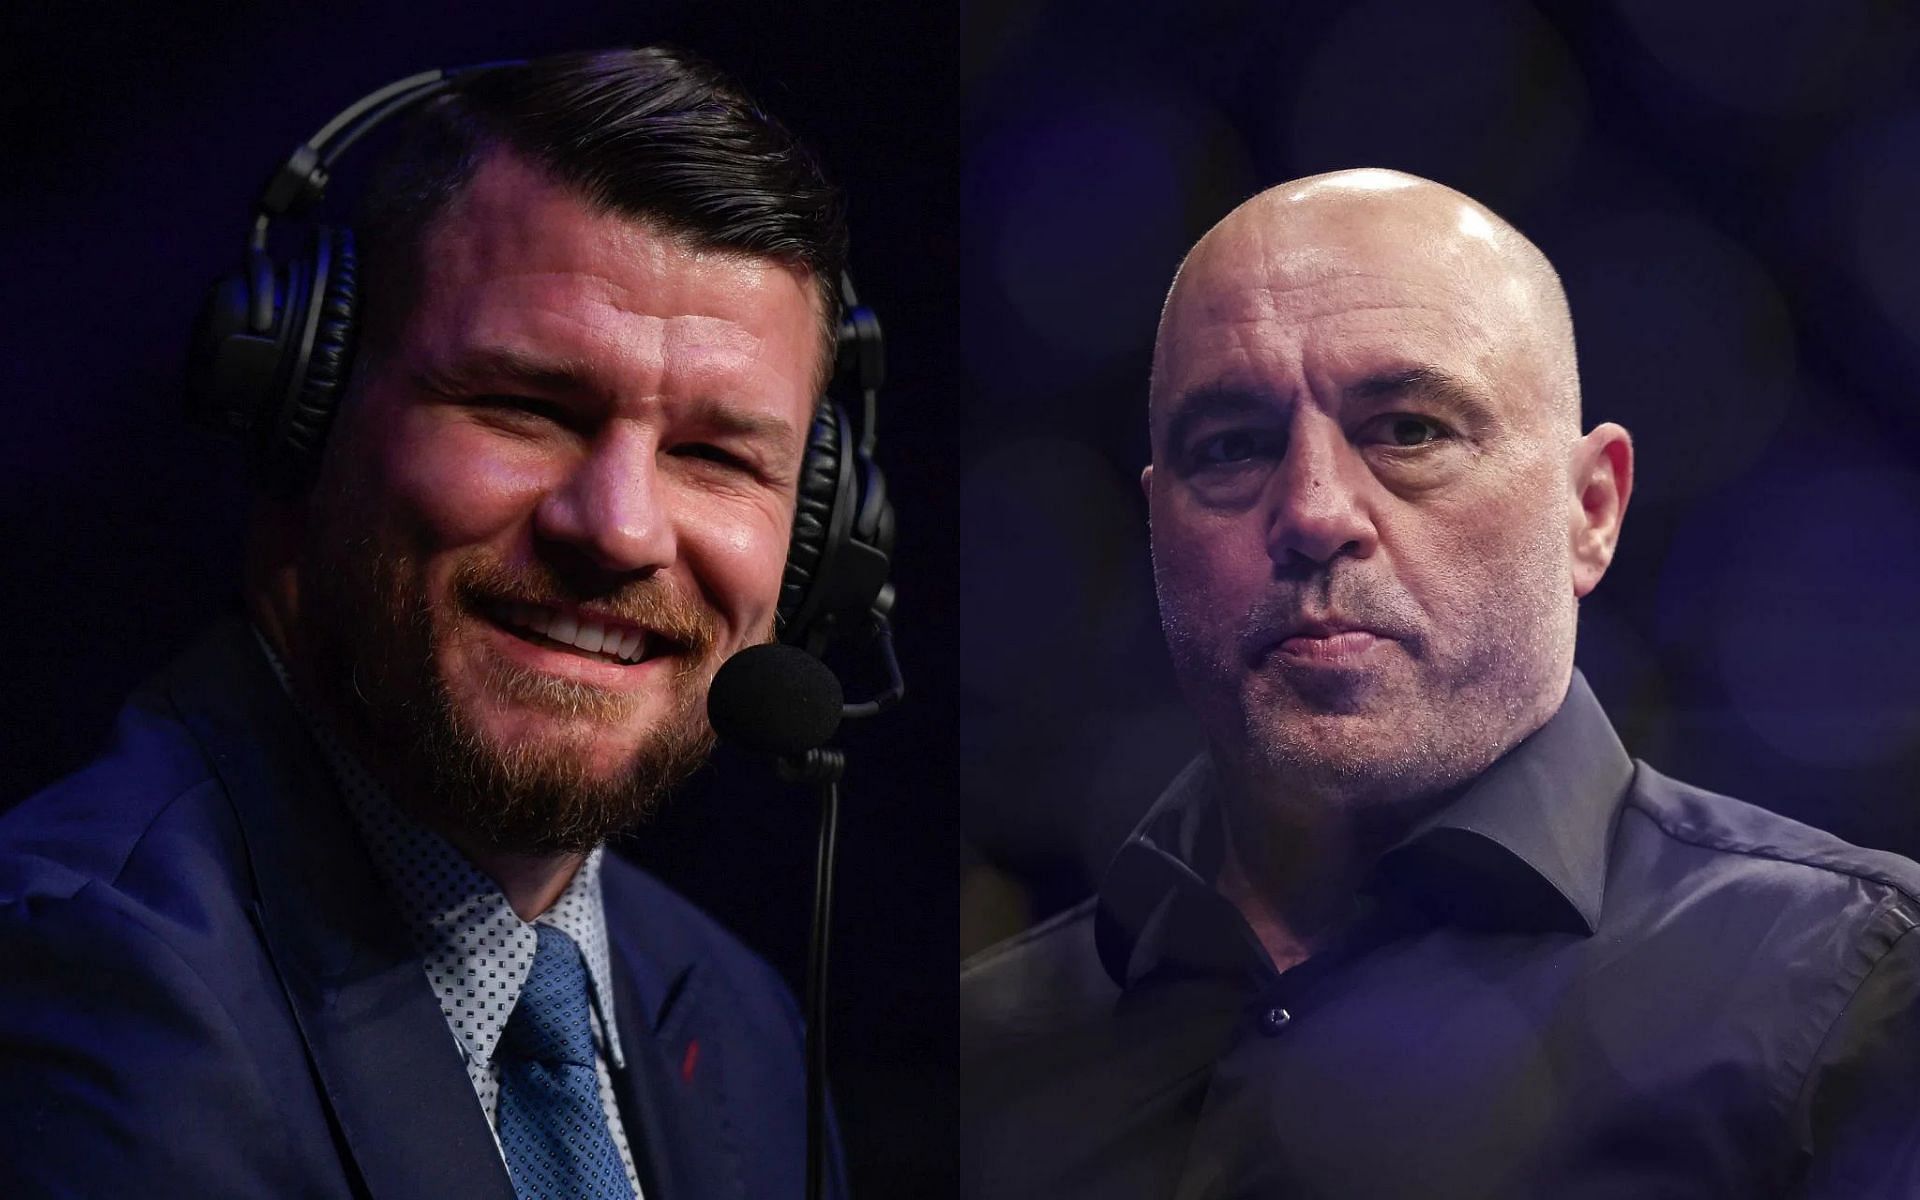 Michael Bisping (left) and Joe Rogan (right) [Images courtesy of Getty]